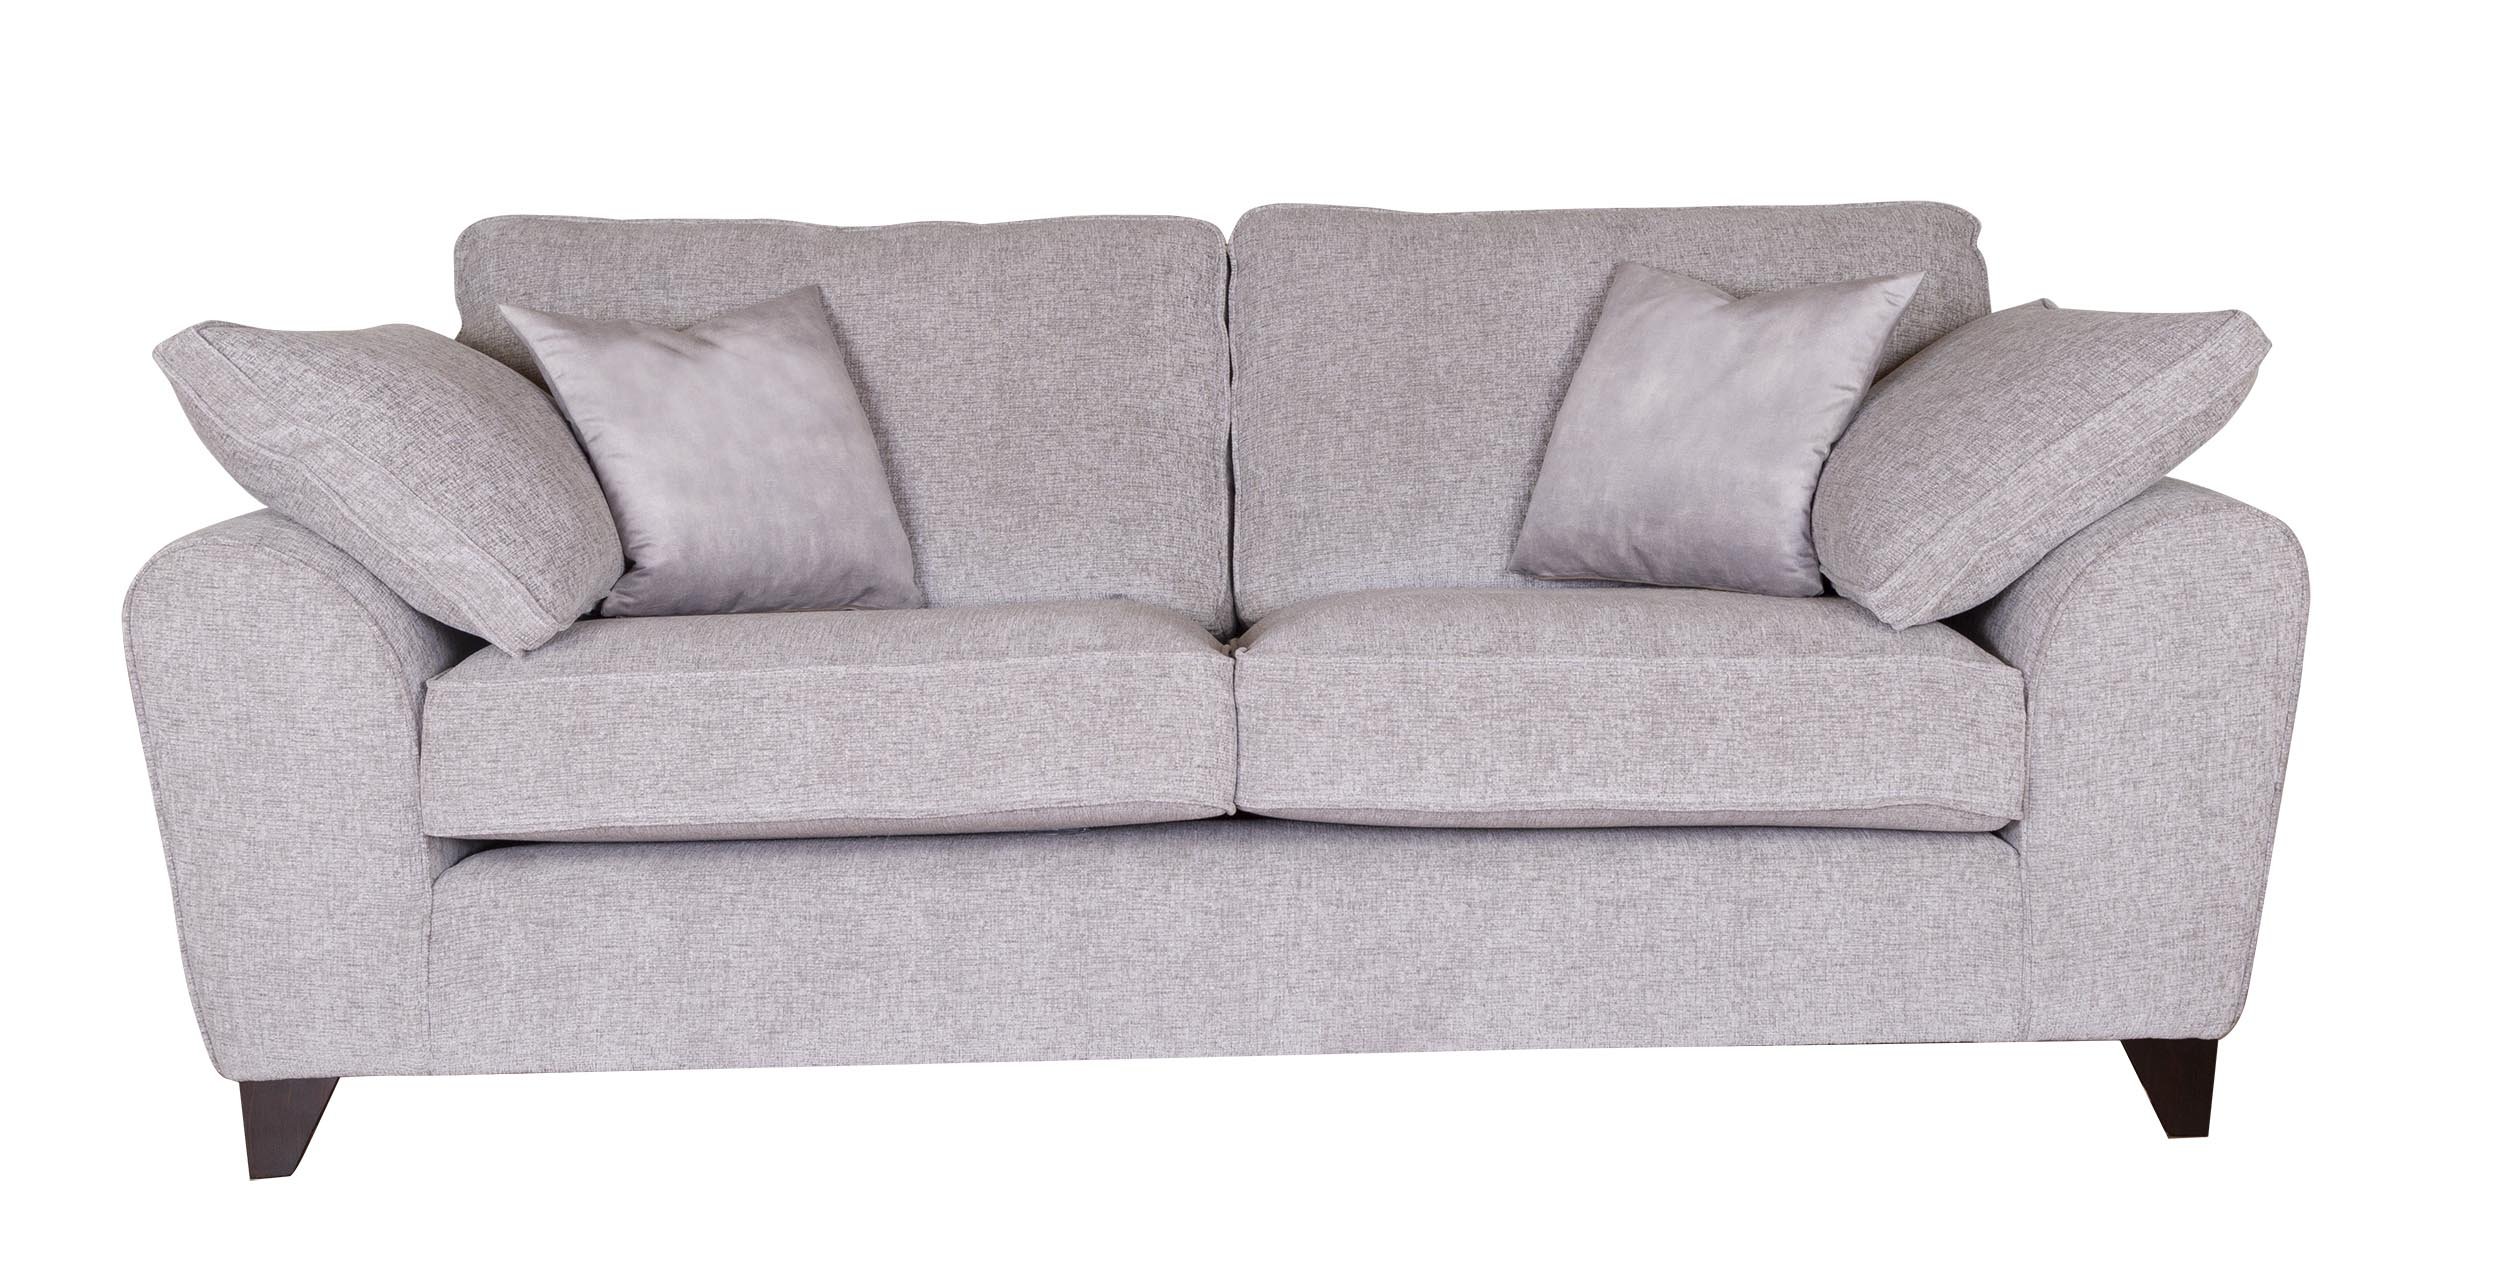 Robyn - 3 Seater Sofa - Front.jpg